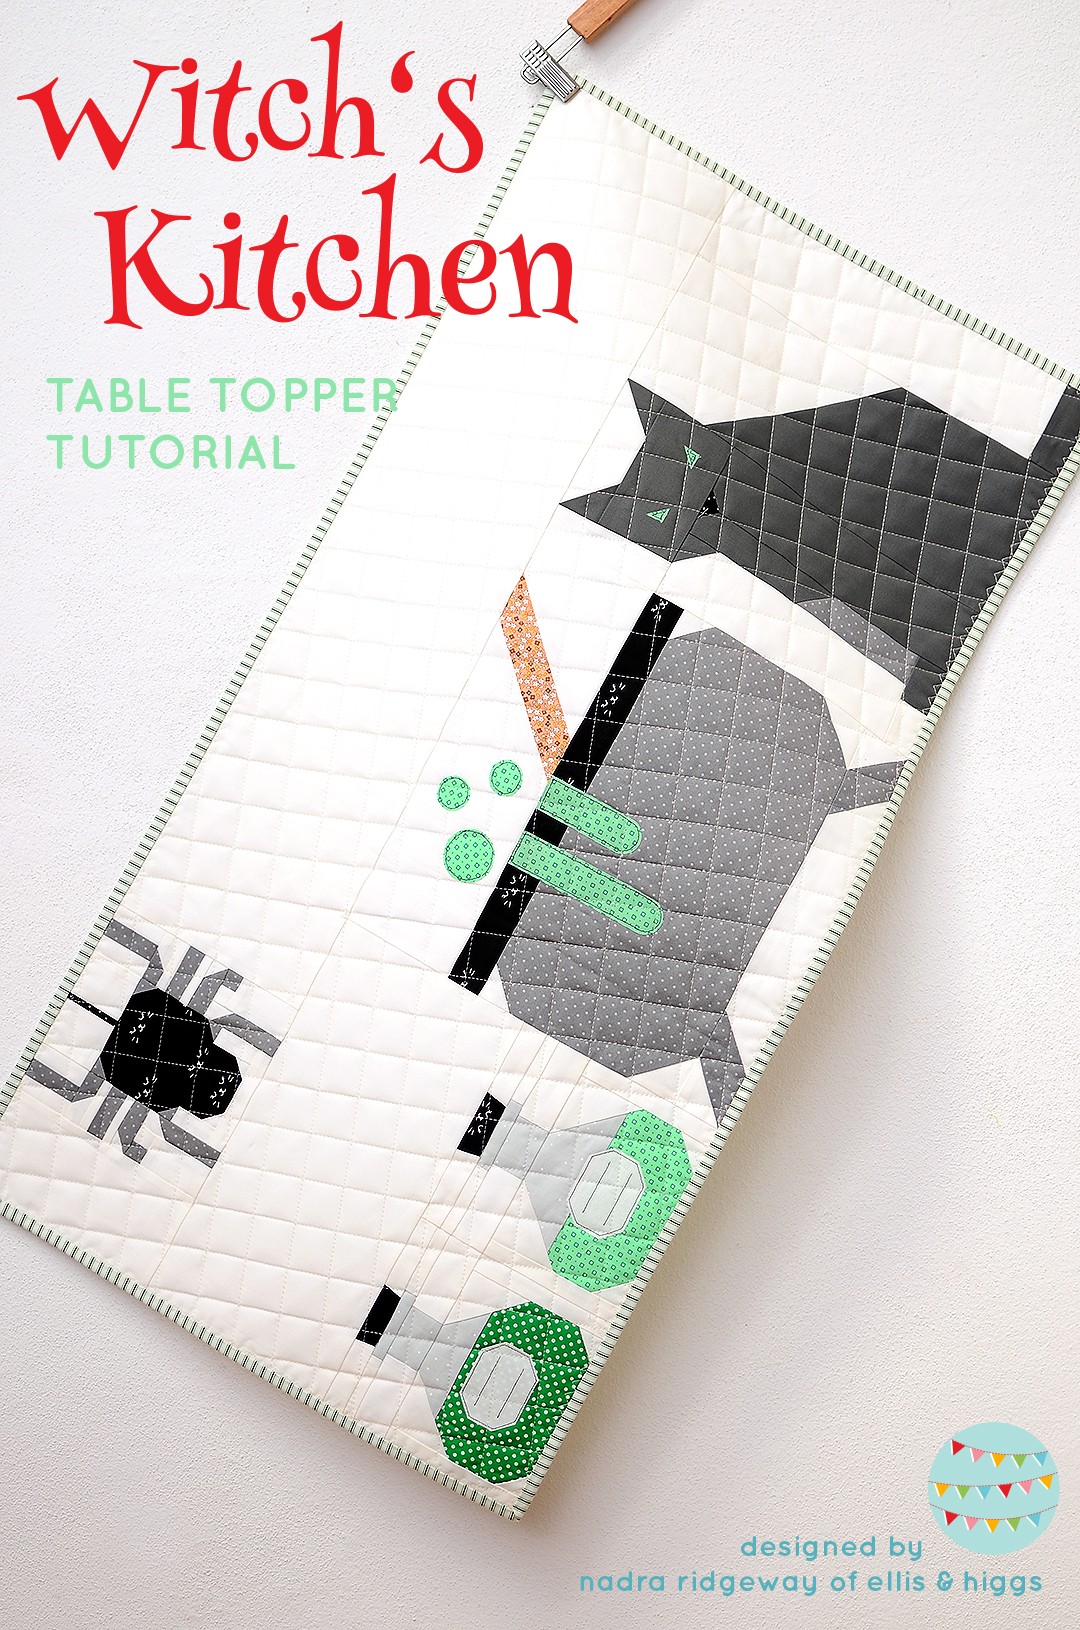 Witch's Kitchen Table Topper